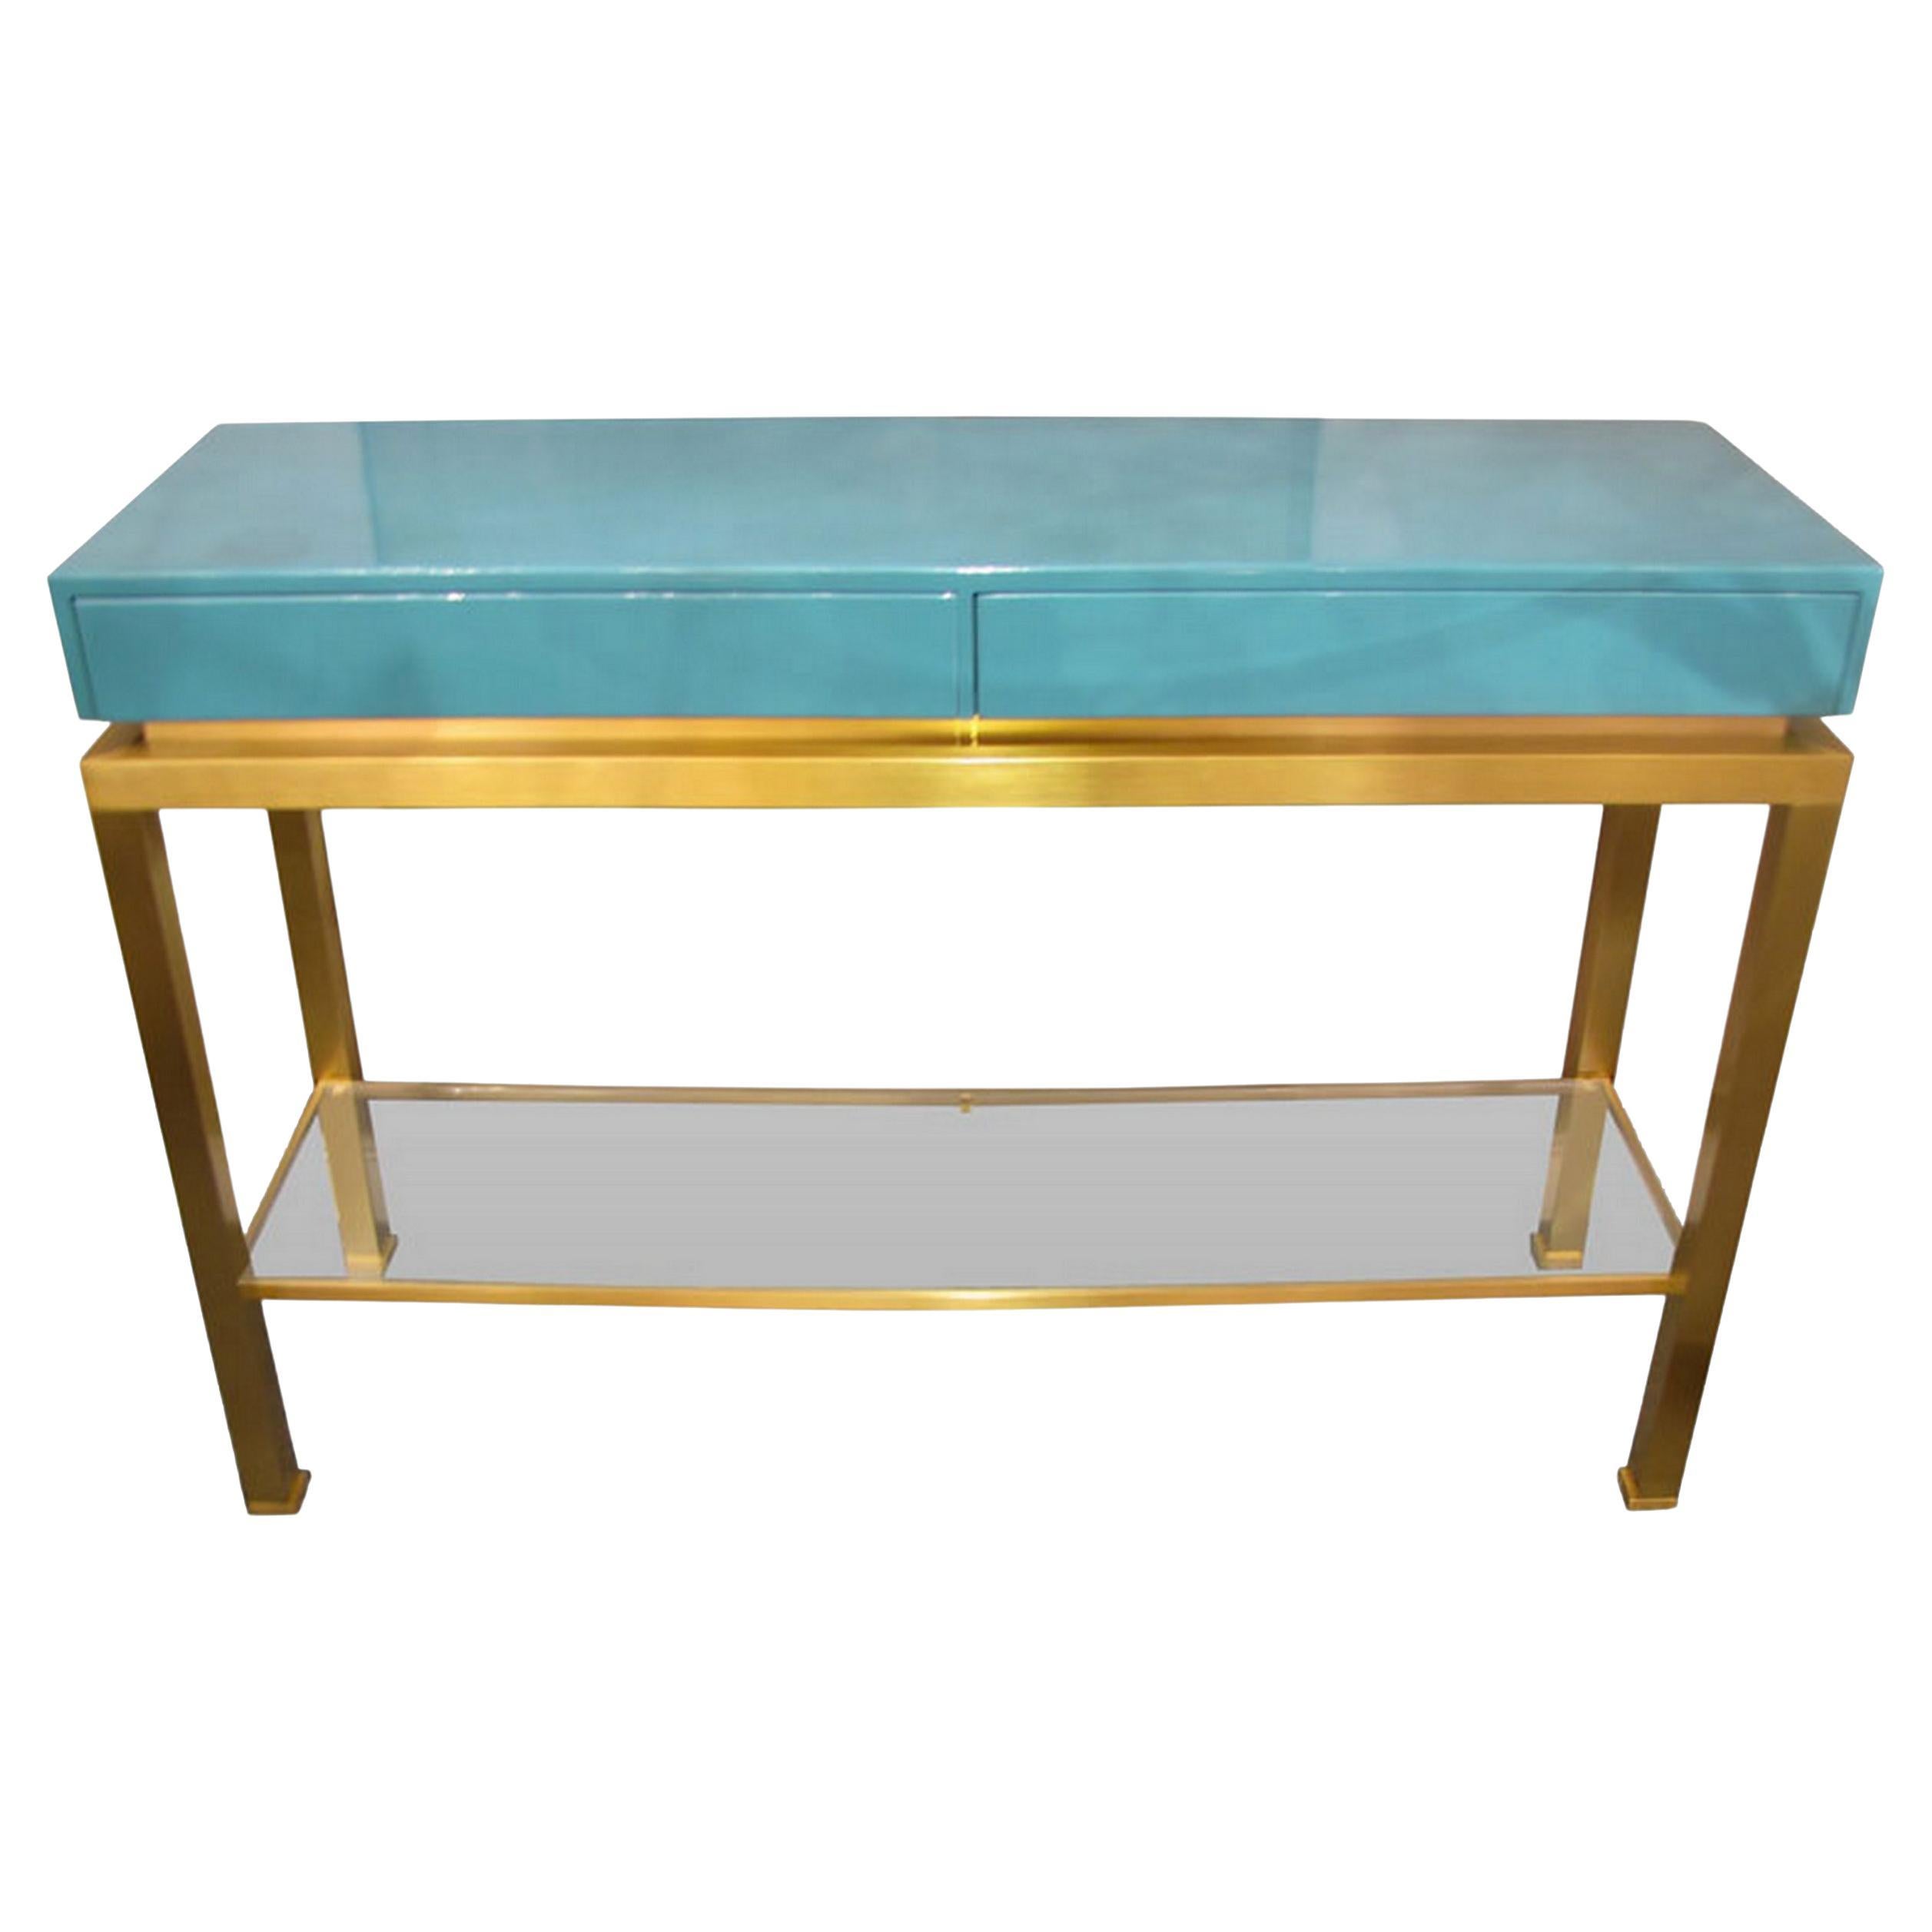 Console in brass and blue lacquered wood, by G. Lefèvre, Ed. Maison Jansen, 1970